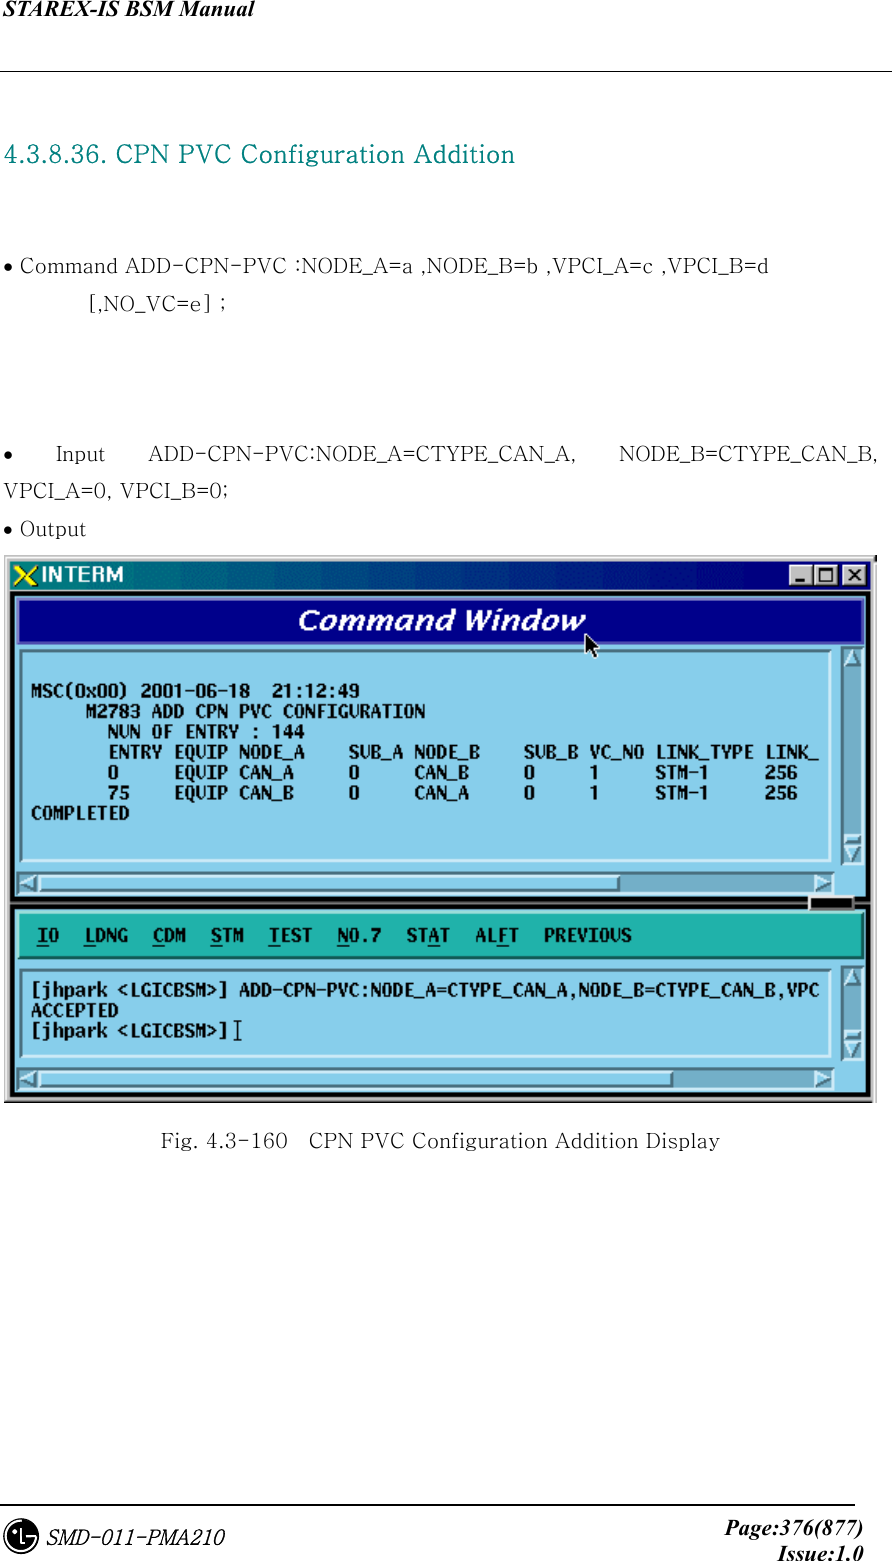 STAREX-IS BSM Manual     Page:376(877)Issue:1.0SMD-011-PMA210  4.3.8.36. CPN PVC Configuration Addition    • Command ADD-CPN-PVC :NODE_A=a ,NODE_B=b ,VPCI_A=c ,VPCI_B=d   [,NO_VC=e] ;    • Input ADD-CPN-PVC:NODE_A=CTYPE_CAN_A,  NODE_B=CTYPE_CAN_B, VPCI_A=0, VPCI_B=0; • Output  Fig. 4.3-160    CPN PVC Configuration Addition Display